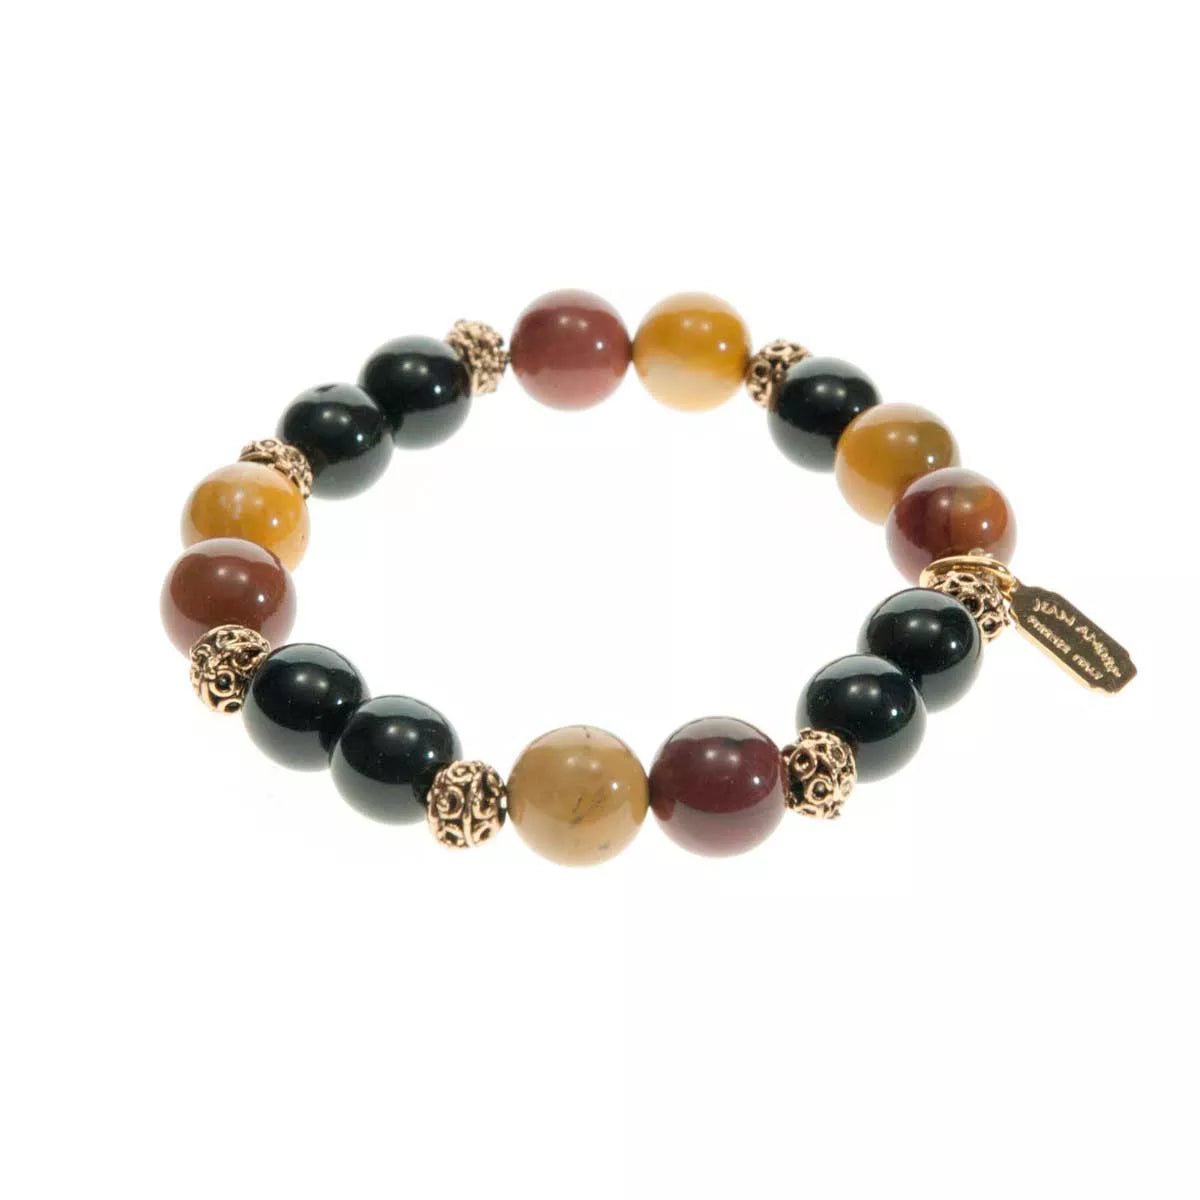 Bracelet in semiprecious stones and glass